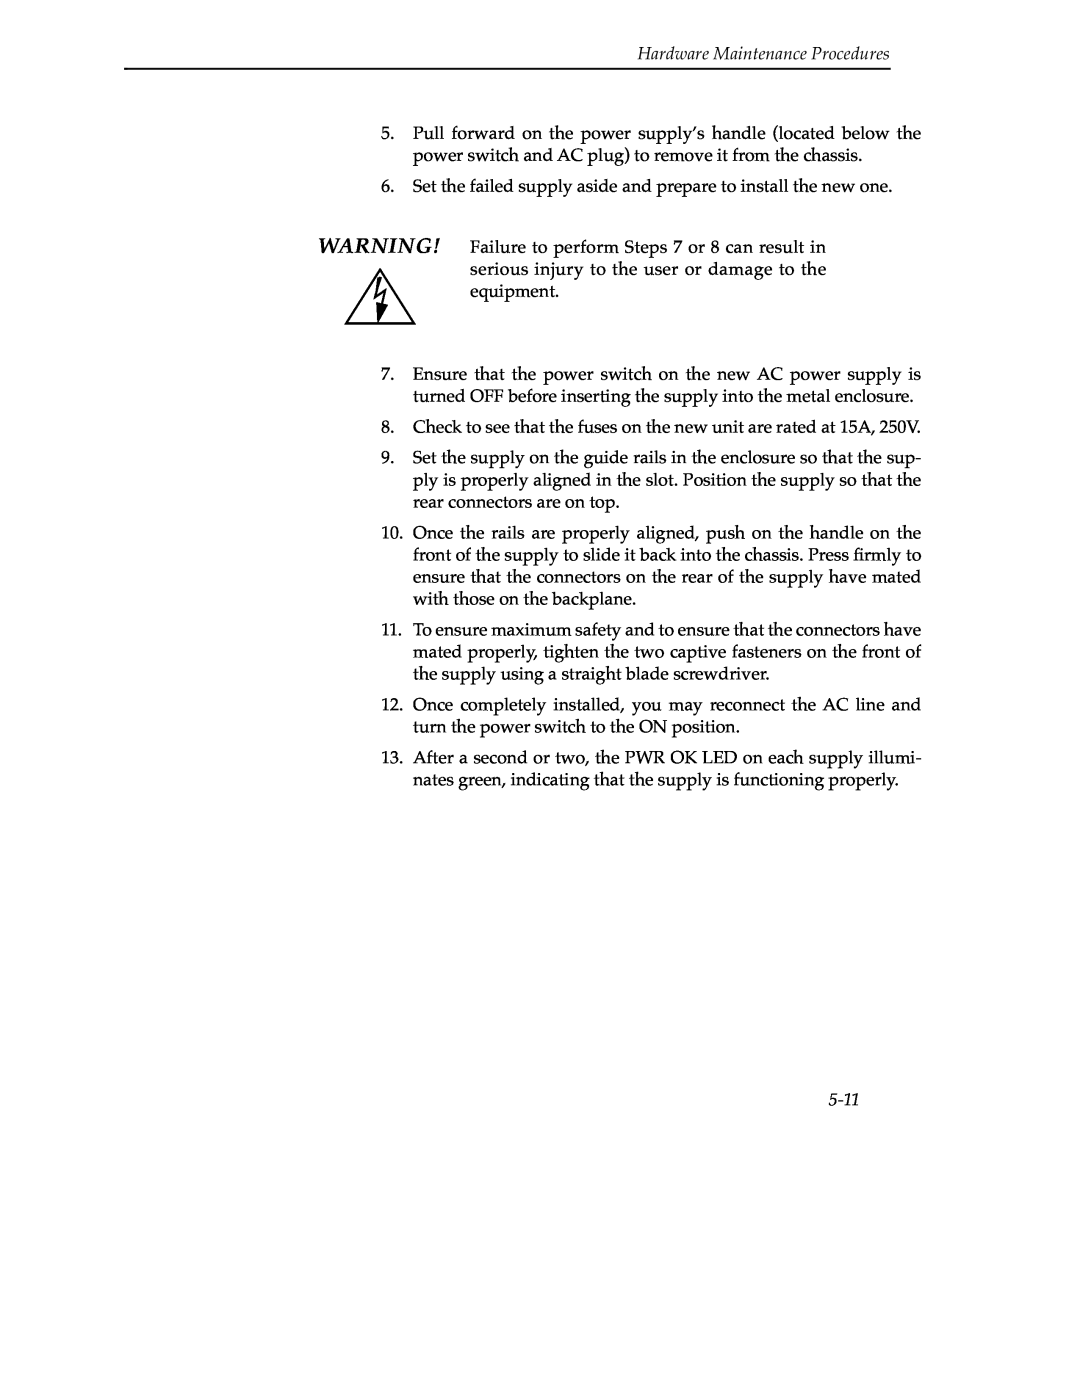 Cabletron Systems 9A000 manual 5-11, Hardware Maintenance Procedures 